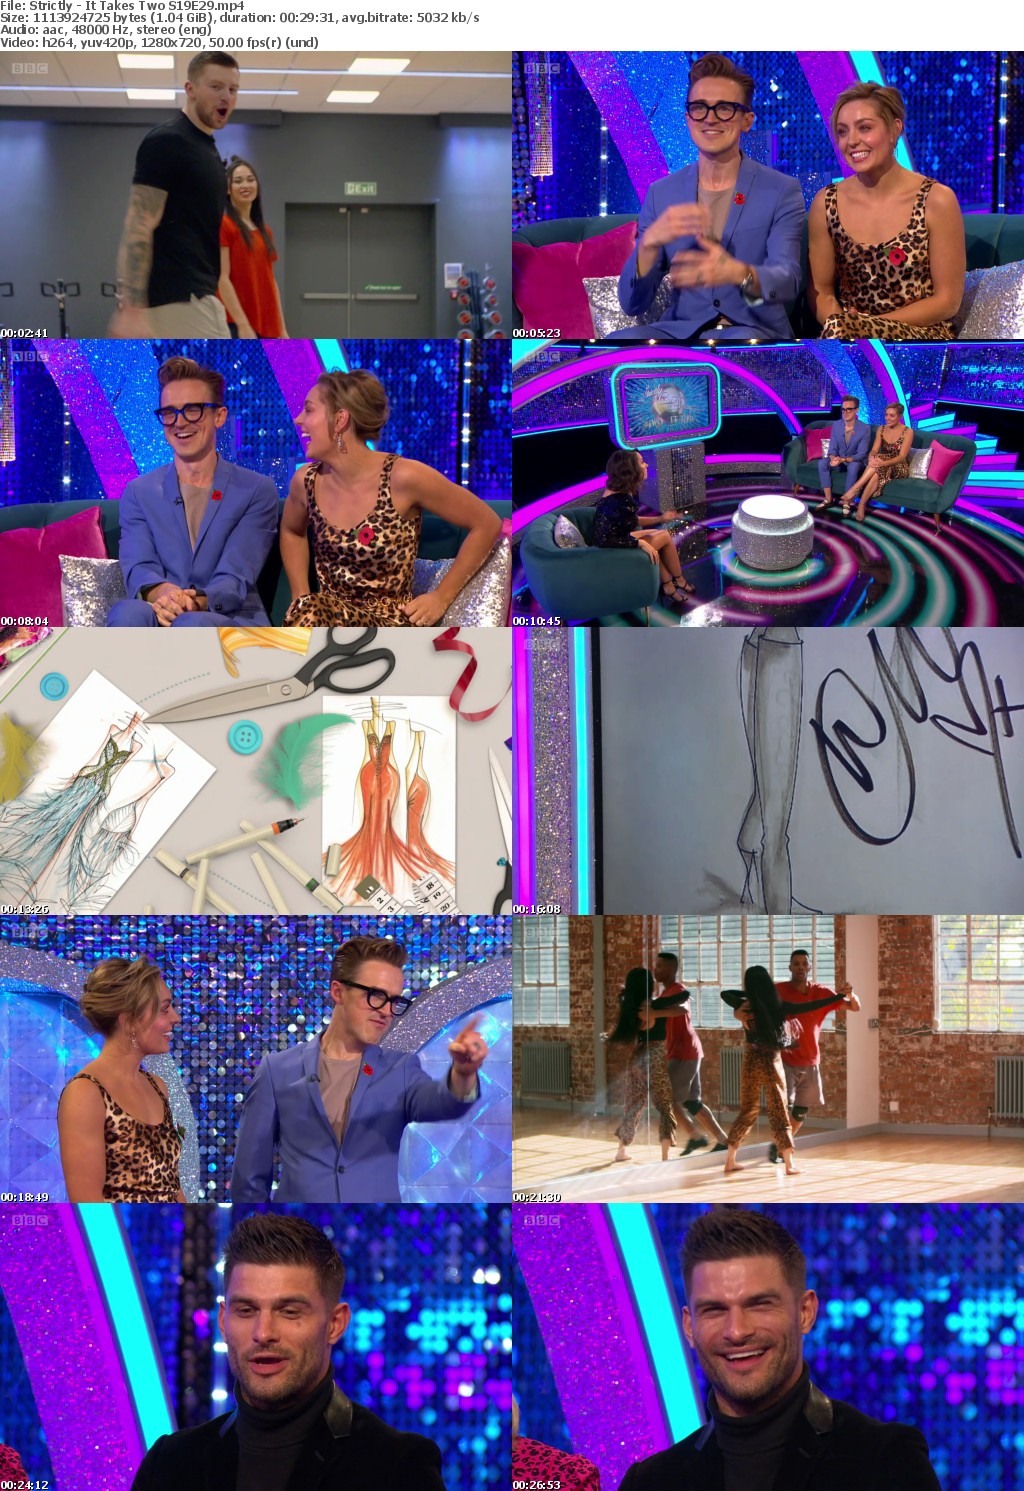 Strictly - It Takes Two S19E29 (1280x720p HD, 50fps, soft Eng subs)